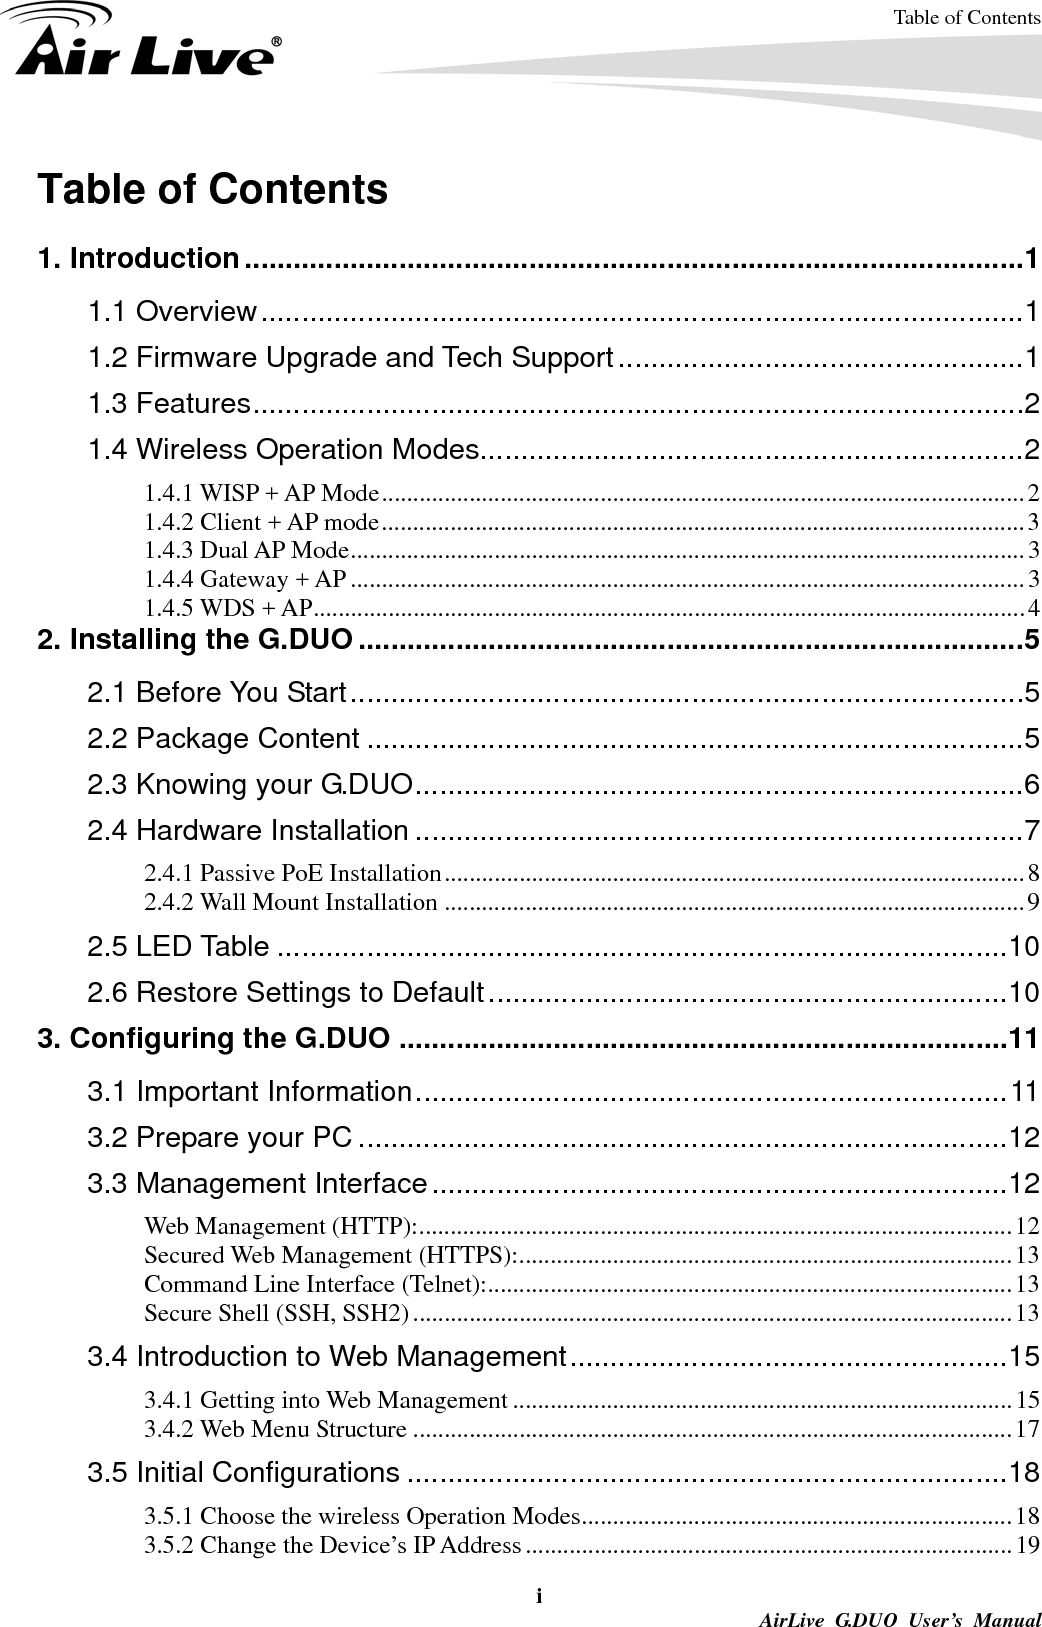 Table of Contents i AirLive G.DUO User’s Manual Table of Contents  1. Introduction ................................................................................................ 1 1.1 Overview .............................................................................................. 1 1.2 Firmware Upgrade and Tech Support .................................................. 1 1.3 Features ............................................................................................... 2 1.4 Wireless Operation Modes ................................................................... 2 1.4.1 WISP + AP Mode ....................................................................................................... 2 1.4.2 Client + AP mode ....................................................................................................... 3 1.4.3 Dual AP Mode ............................................................................................................ 3 1.4.4 Gateway + AP ............................................................................................................ 3 1.4.5 WDS + AP .................................................................................................................. 4 2. Installing the G.DUO .................................................................................. 5 2.1 Before You Start ................................................................................... 5 2.2 Package Content ................................................................................. 5 2.3 Knowing your G.DUO ........................................................................... 6 2.4 Hardware Installation ........................................................................... 7 2.4.1 Passive PoE Installation ............................................................................................. 8 2.4.2 Wall Mount Installation ............................................................................................. 9 2.5 LED Table .......................................................................................... 10 2.6 Restore Settings to Default ................................................................ 10 3. Configuring the G.DUO ........................................................................... 11 3.1 Important Information ......................................................................... 11 3.2 Prepare your PC ................................................................................ 12 3.3 Management Interface ....................................................................... 12 Web Management (HTTP): ............................................................................................... 12 Secured Web Management (HTTPS): ............................................................................... 13 Command Line Interface (Telnet): .................................................................................... 13 Secure Shell (SSH, SSH2) ................................................................................................ 13 3.4 Introduction to Web Management ...................................................... 15 3.4.1 Getting into Web Management ................................................................................ 15 3.4.2 Web Menu Structure ................................................................................................ 17 3.5 Initial Configurations .......................................................................... 18 3.5.1 Choose the wireless Operation Modes ..................................................................... 18 3.5.2 Change the Device’s IP Address .............................................................................. 19 